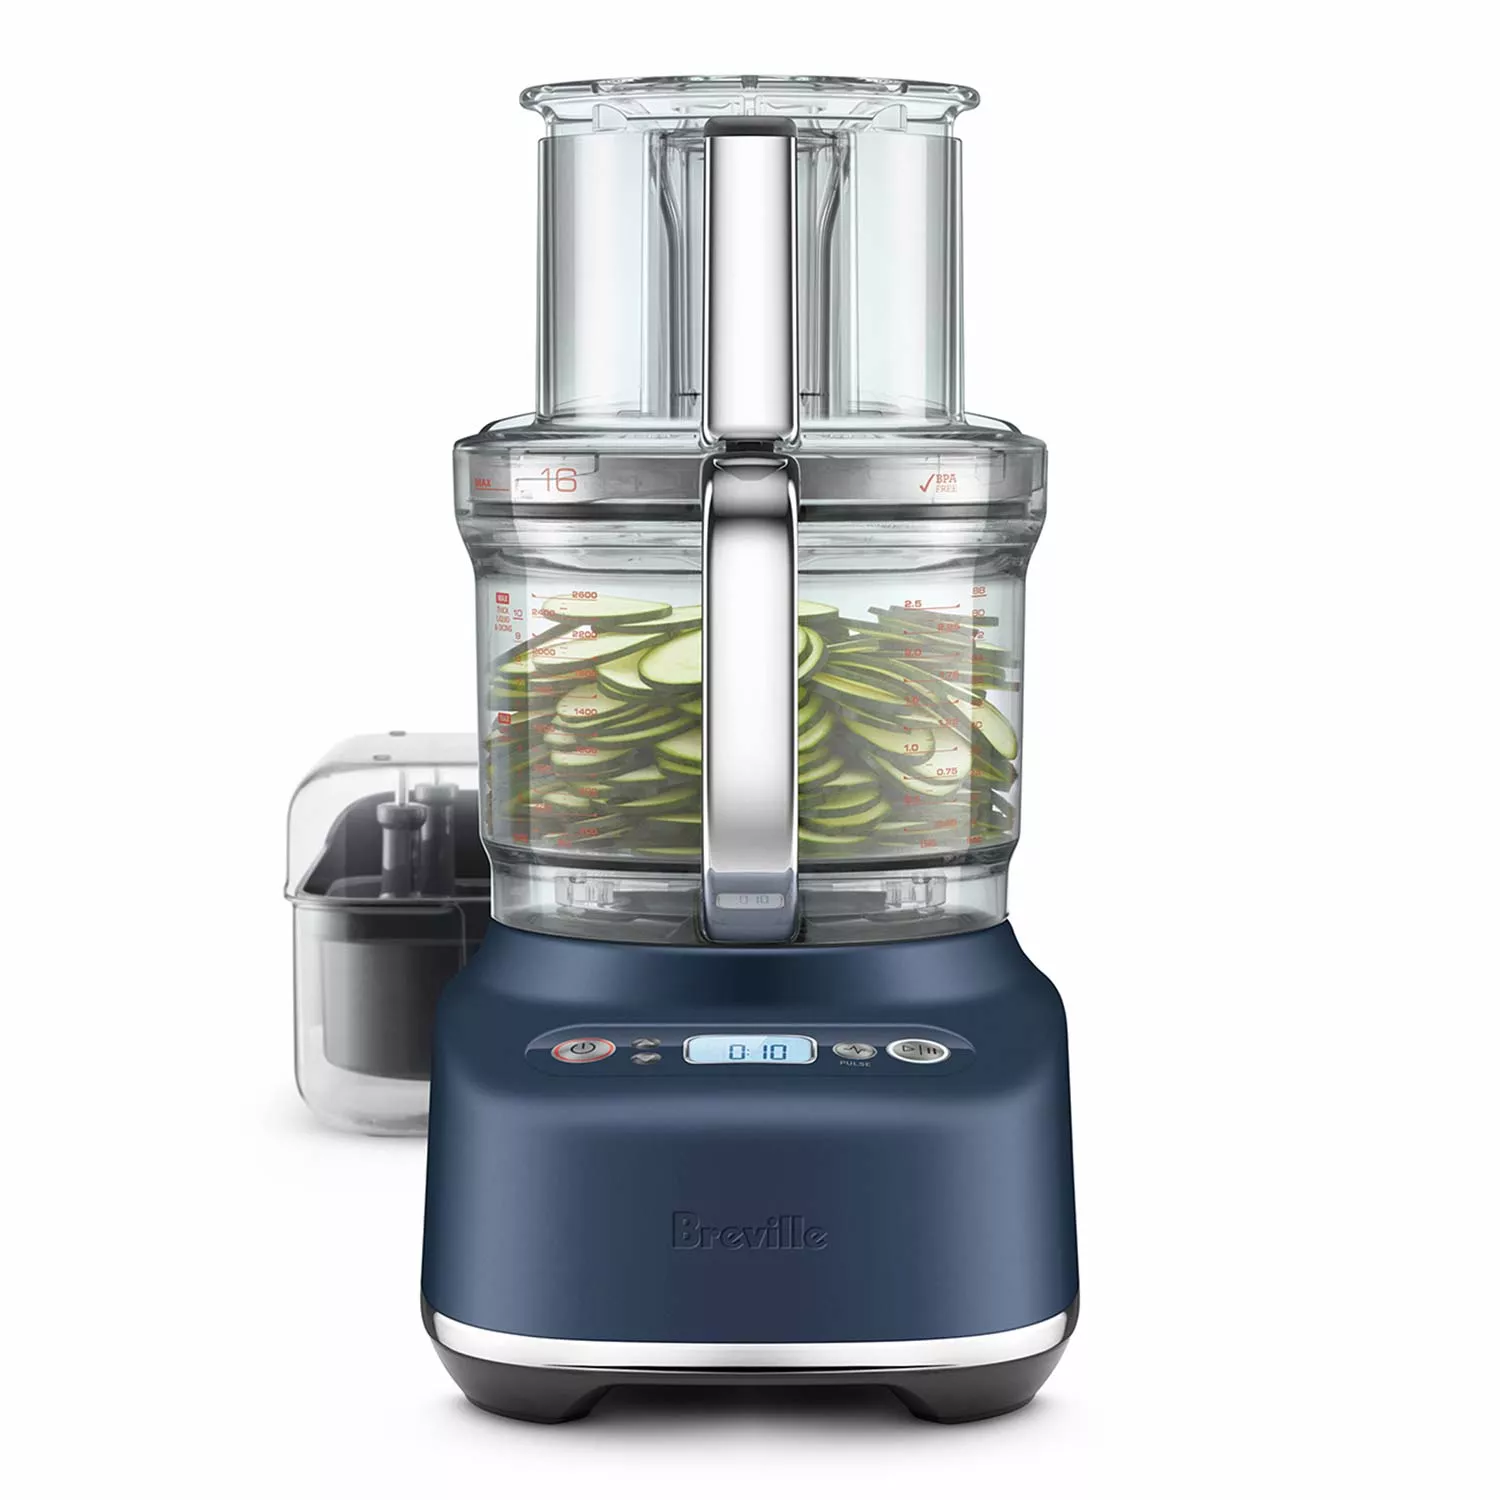 Breville 16-Cup Sous Chef Food Processor